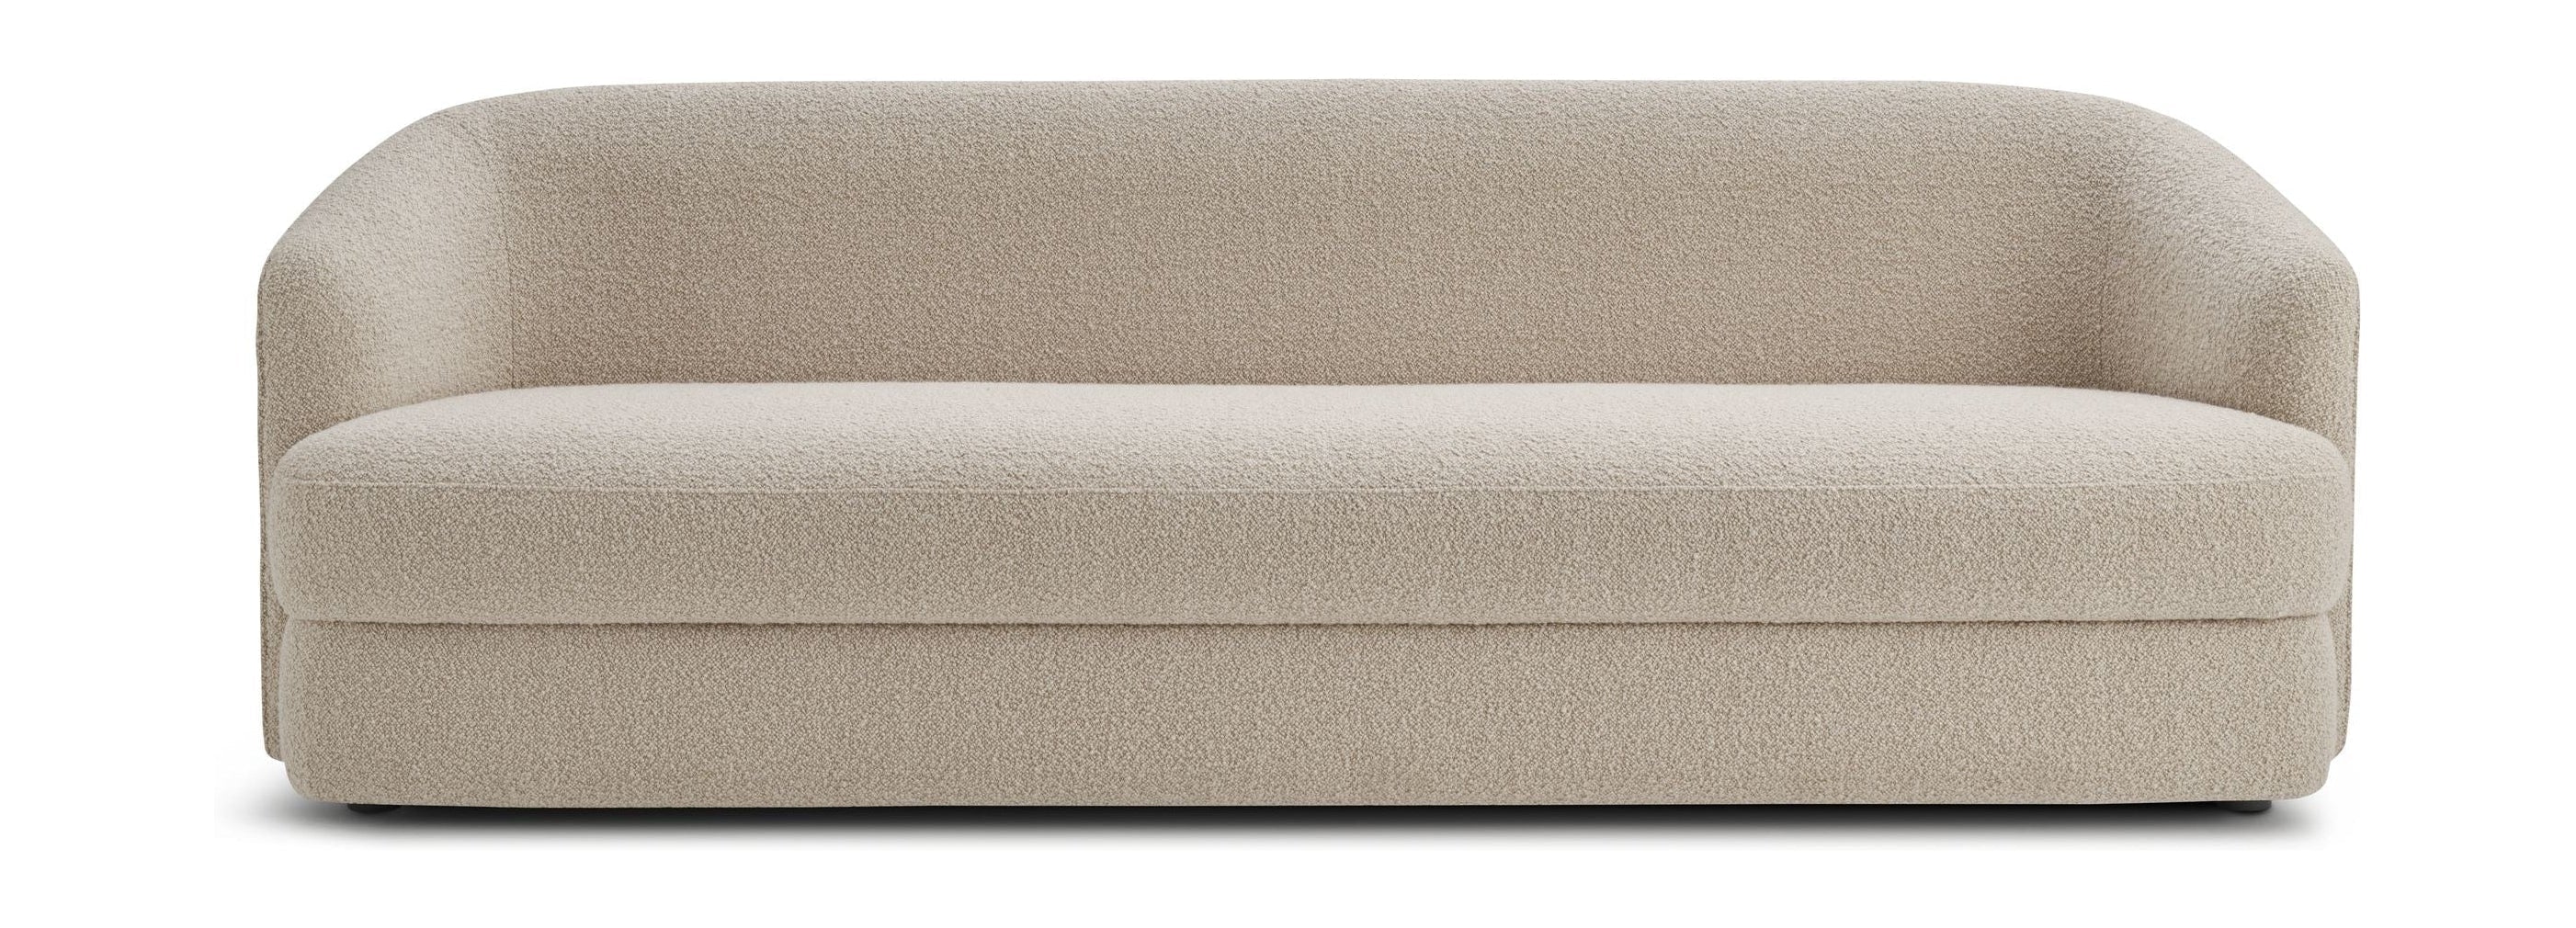 New Works Covent Sofa 3 Seater, Sand